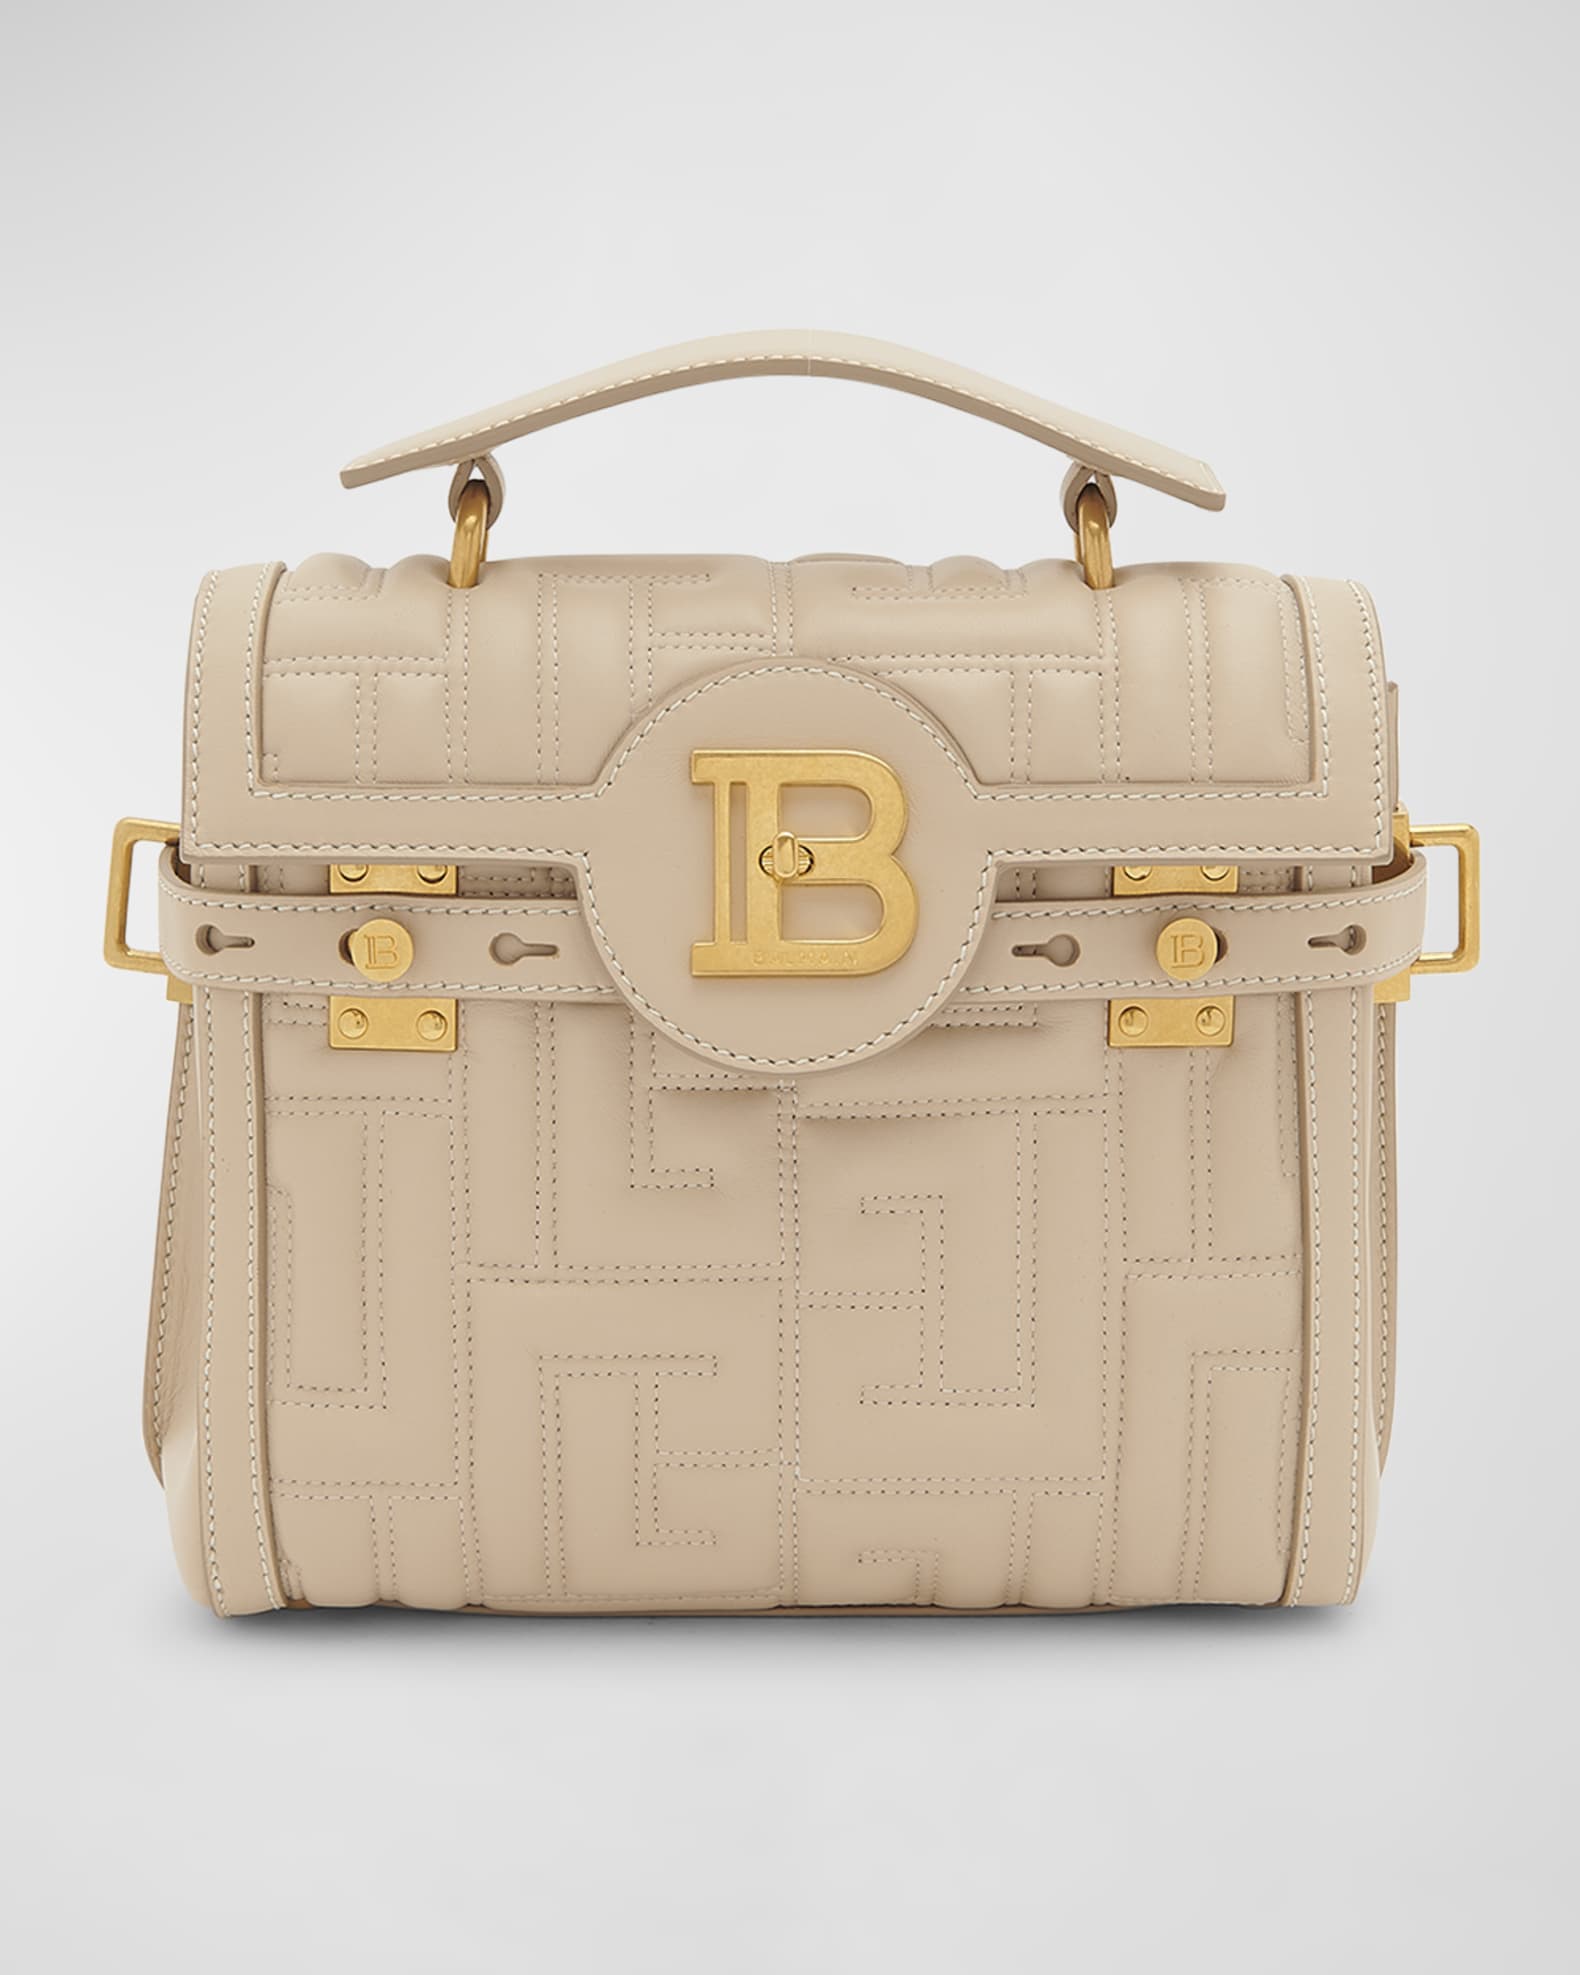 B-Buzz 23 bag in monogram quilted leather - Women